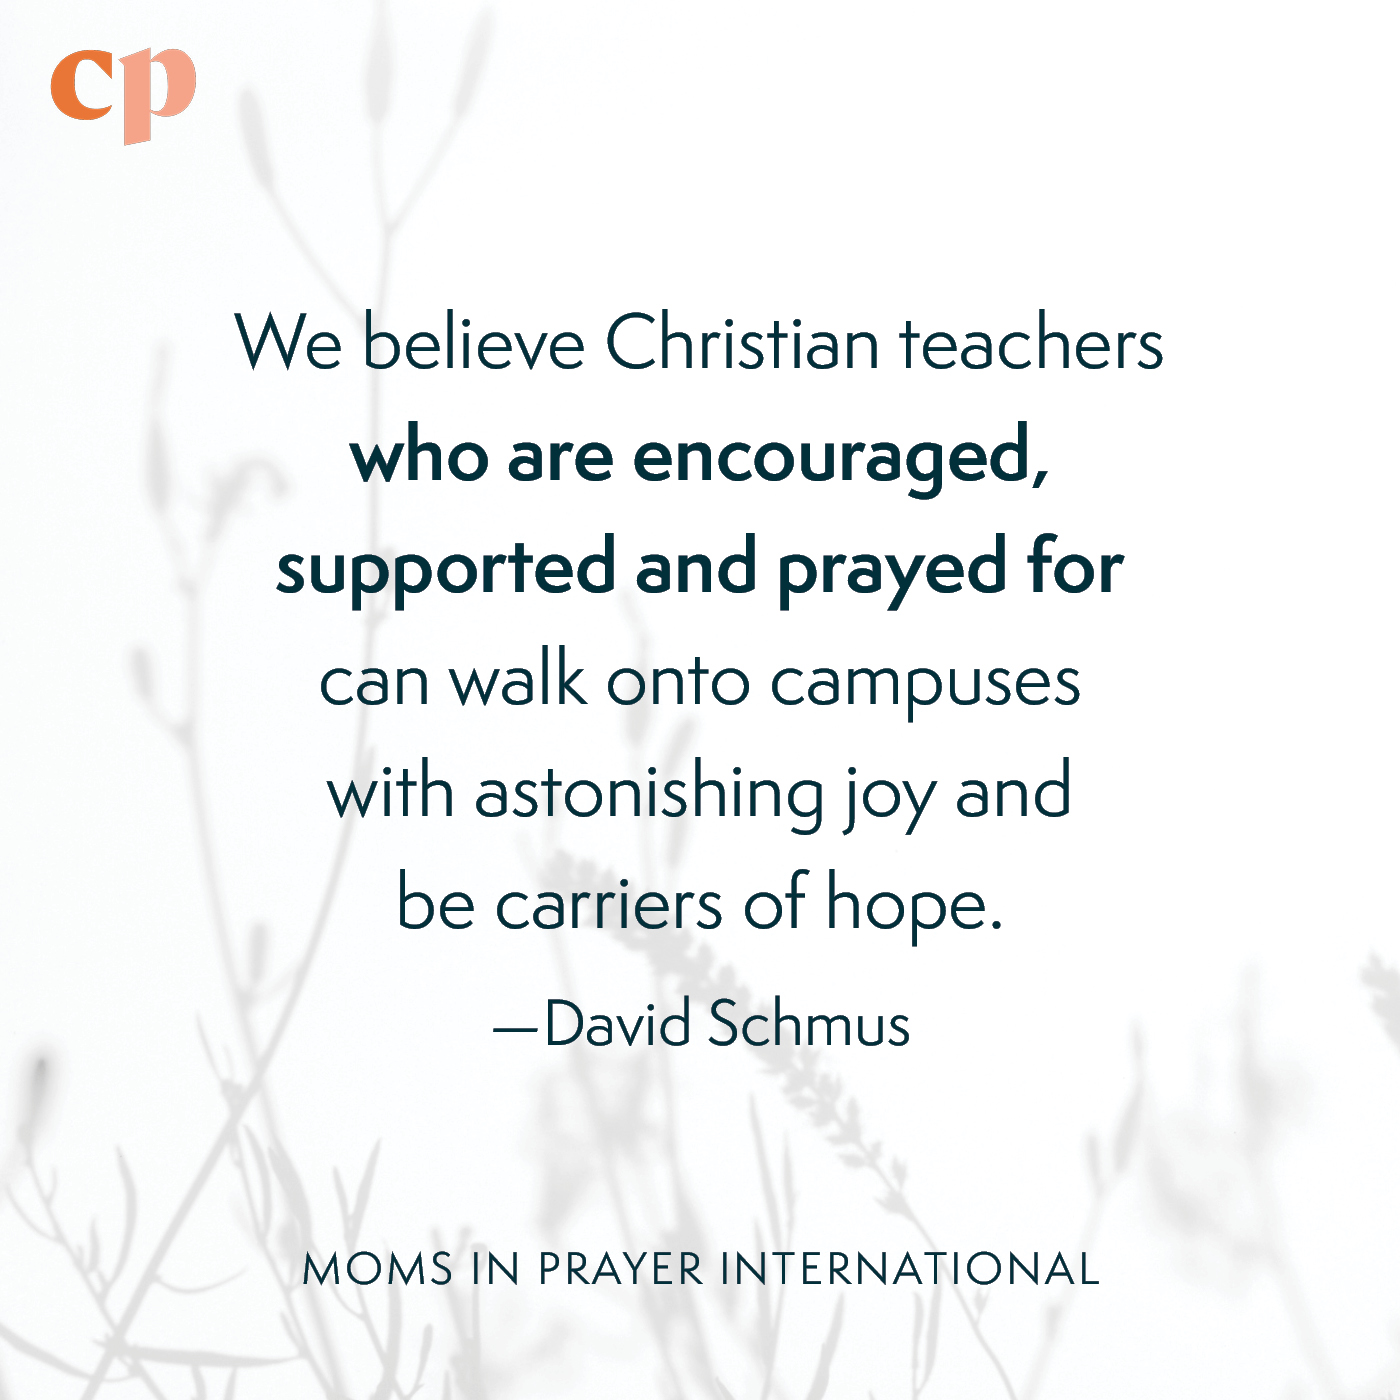 Pray for Christian teachers and students